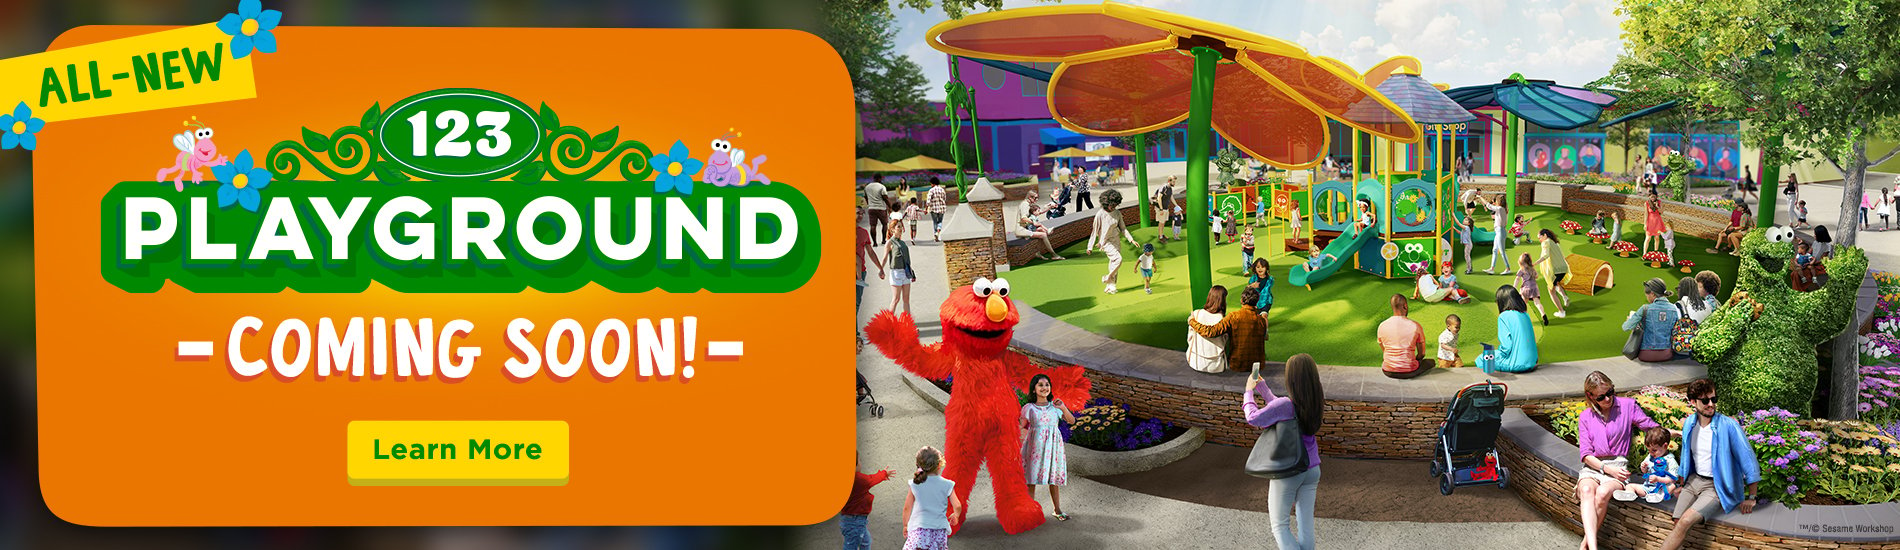 All-New 123 Playground! Coming soon!